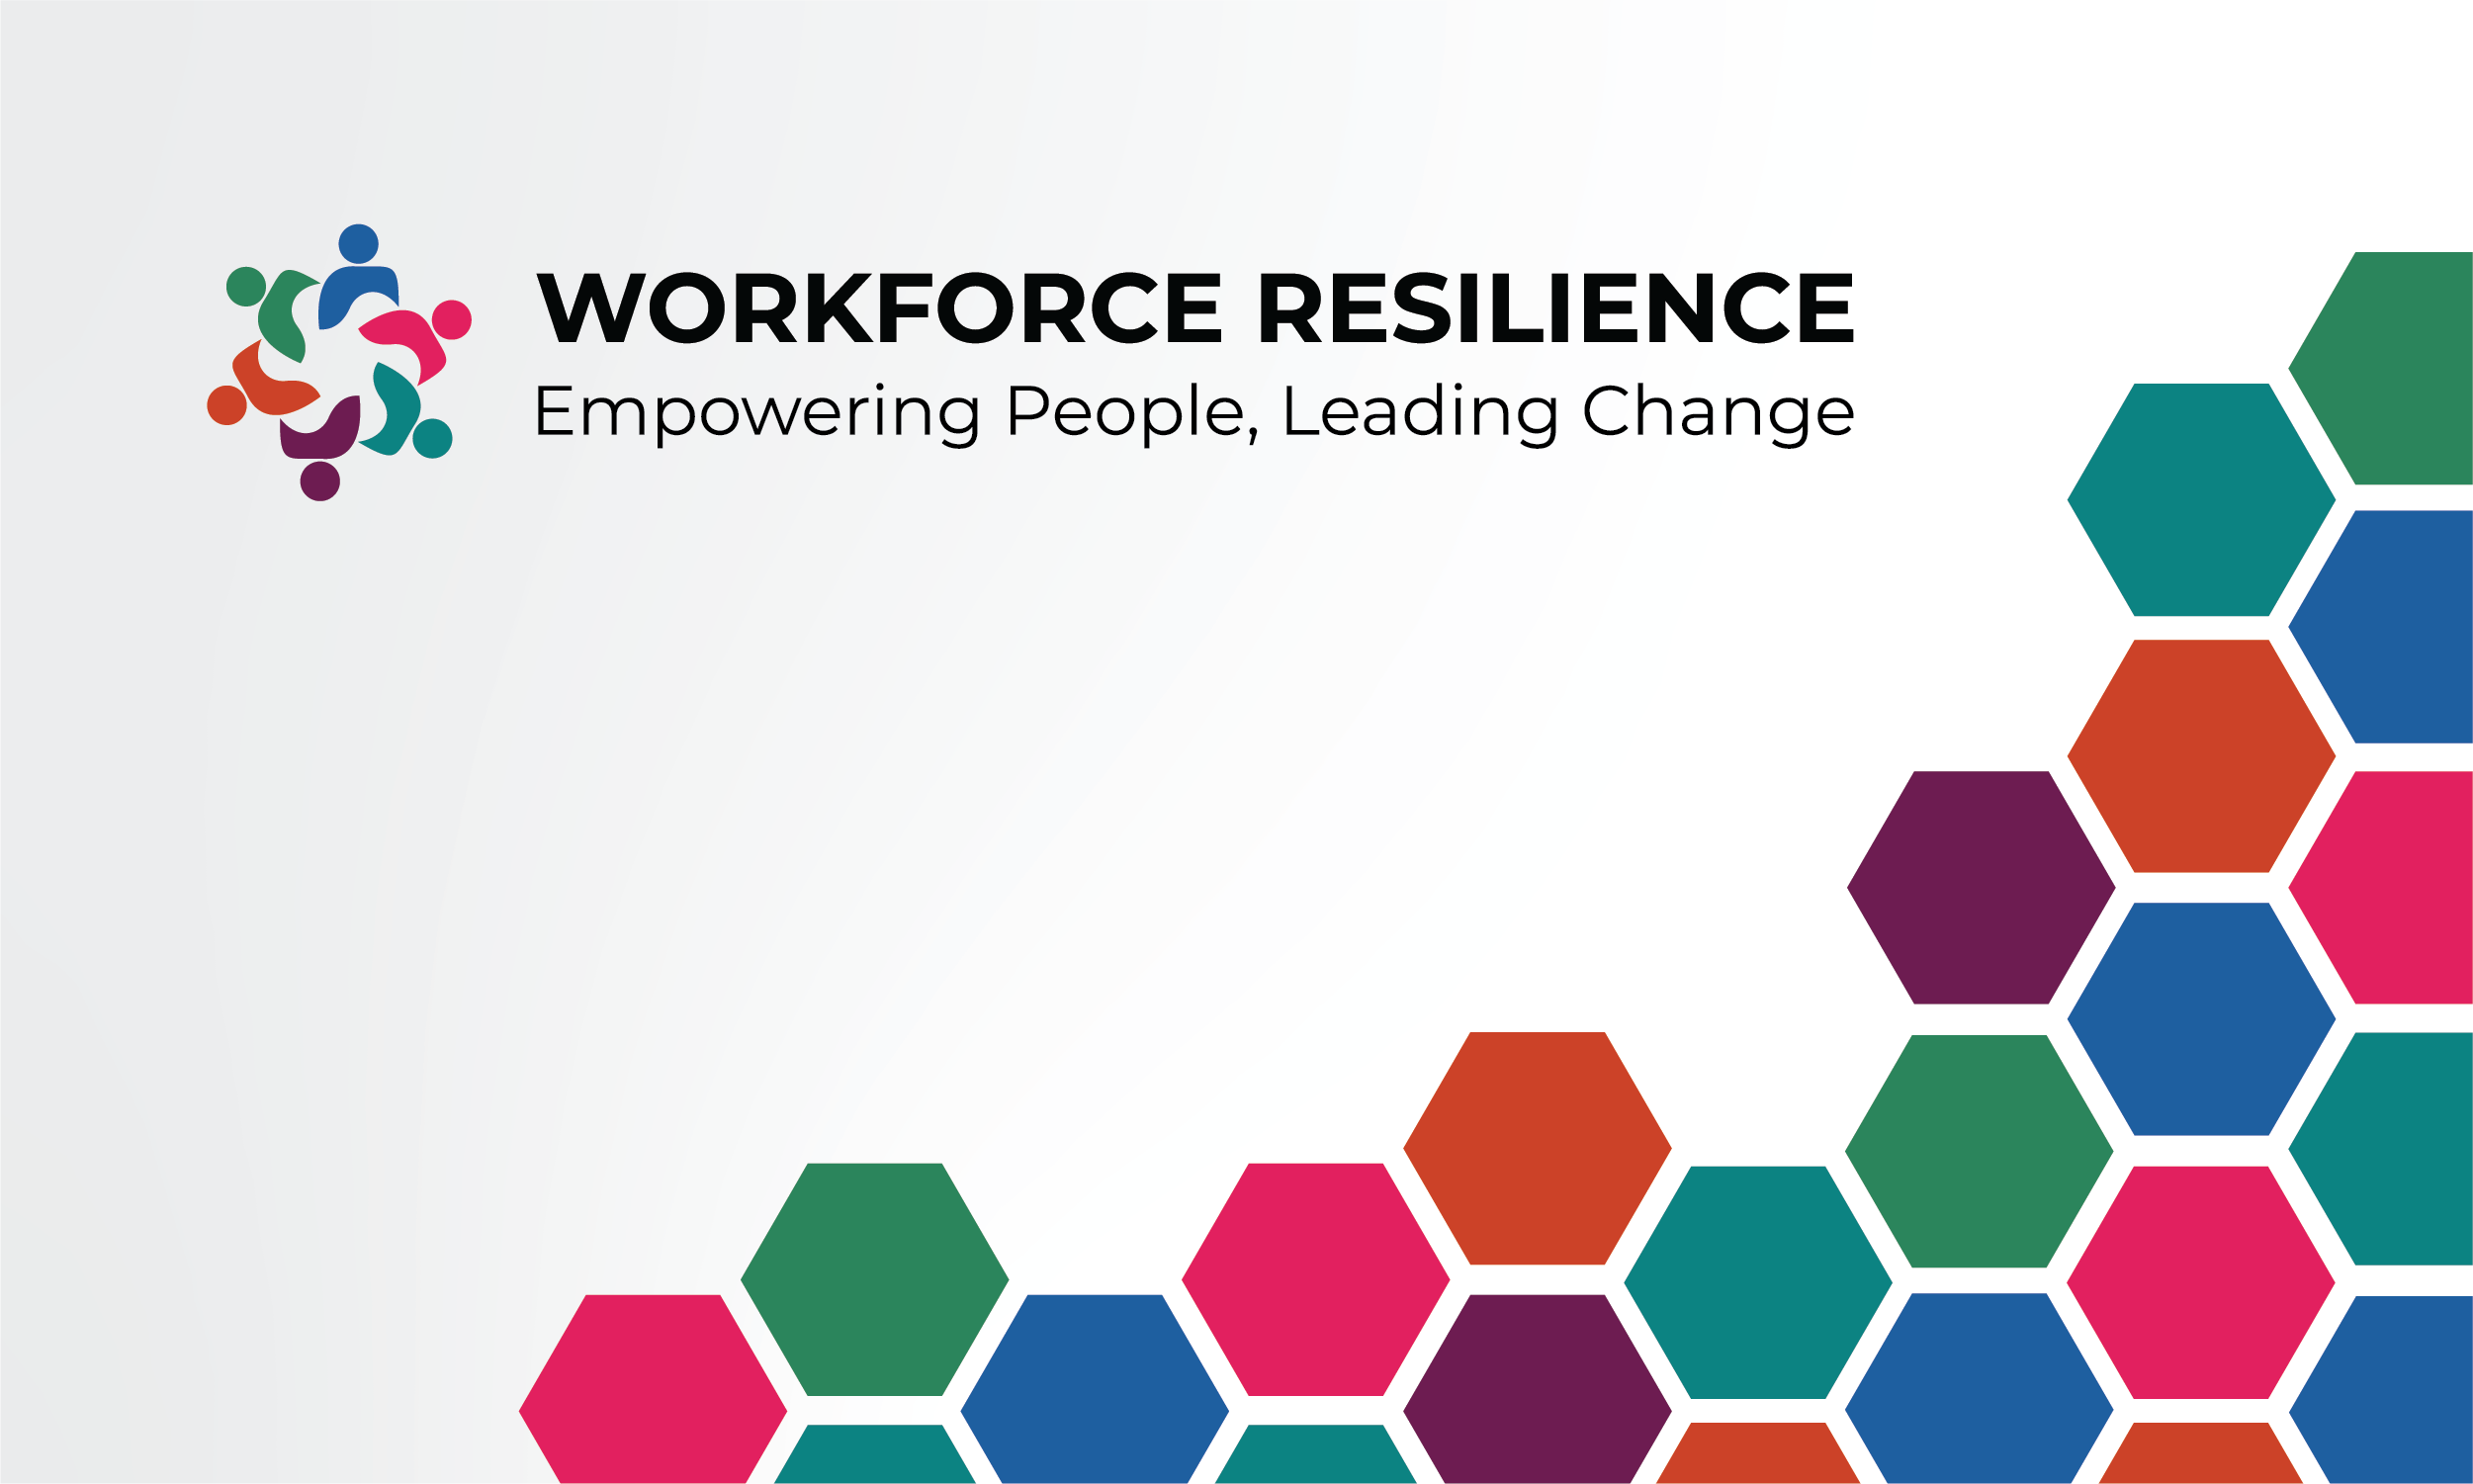 Workforce Resilience program logo with cutline text "Empowering People, Leading Change"